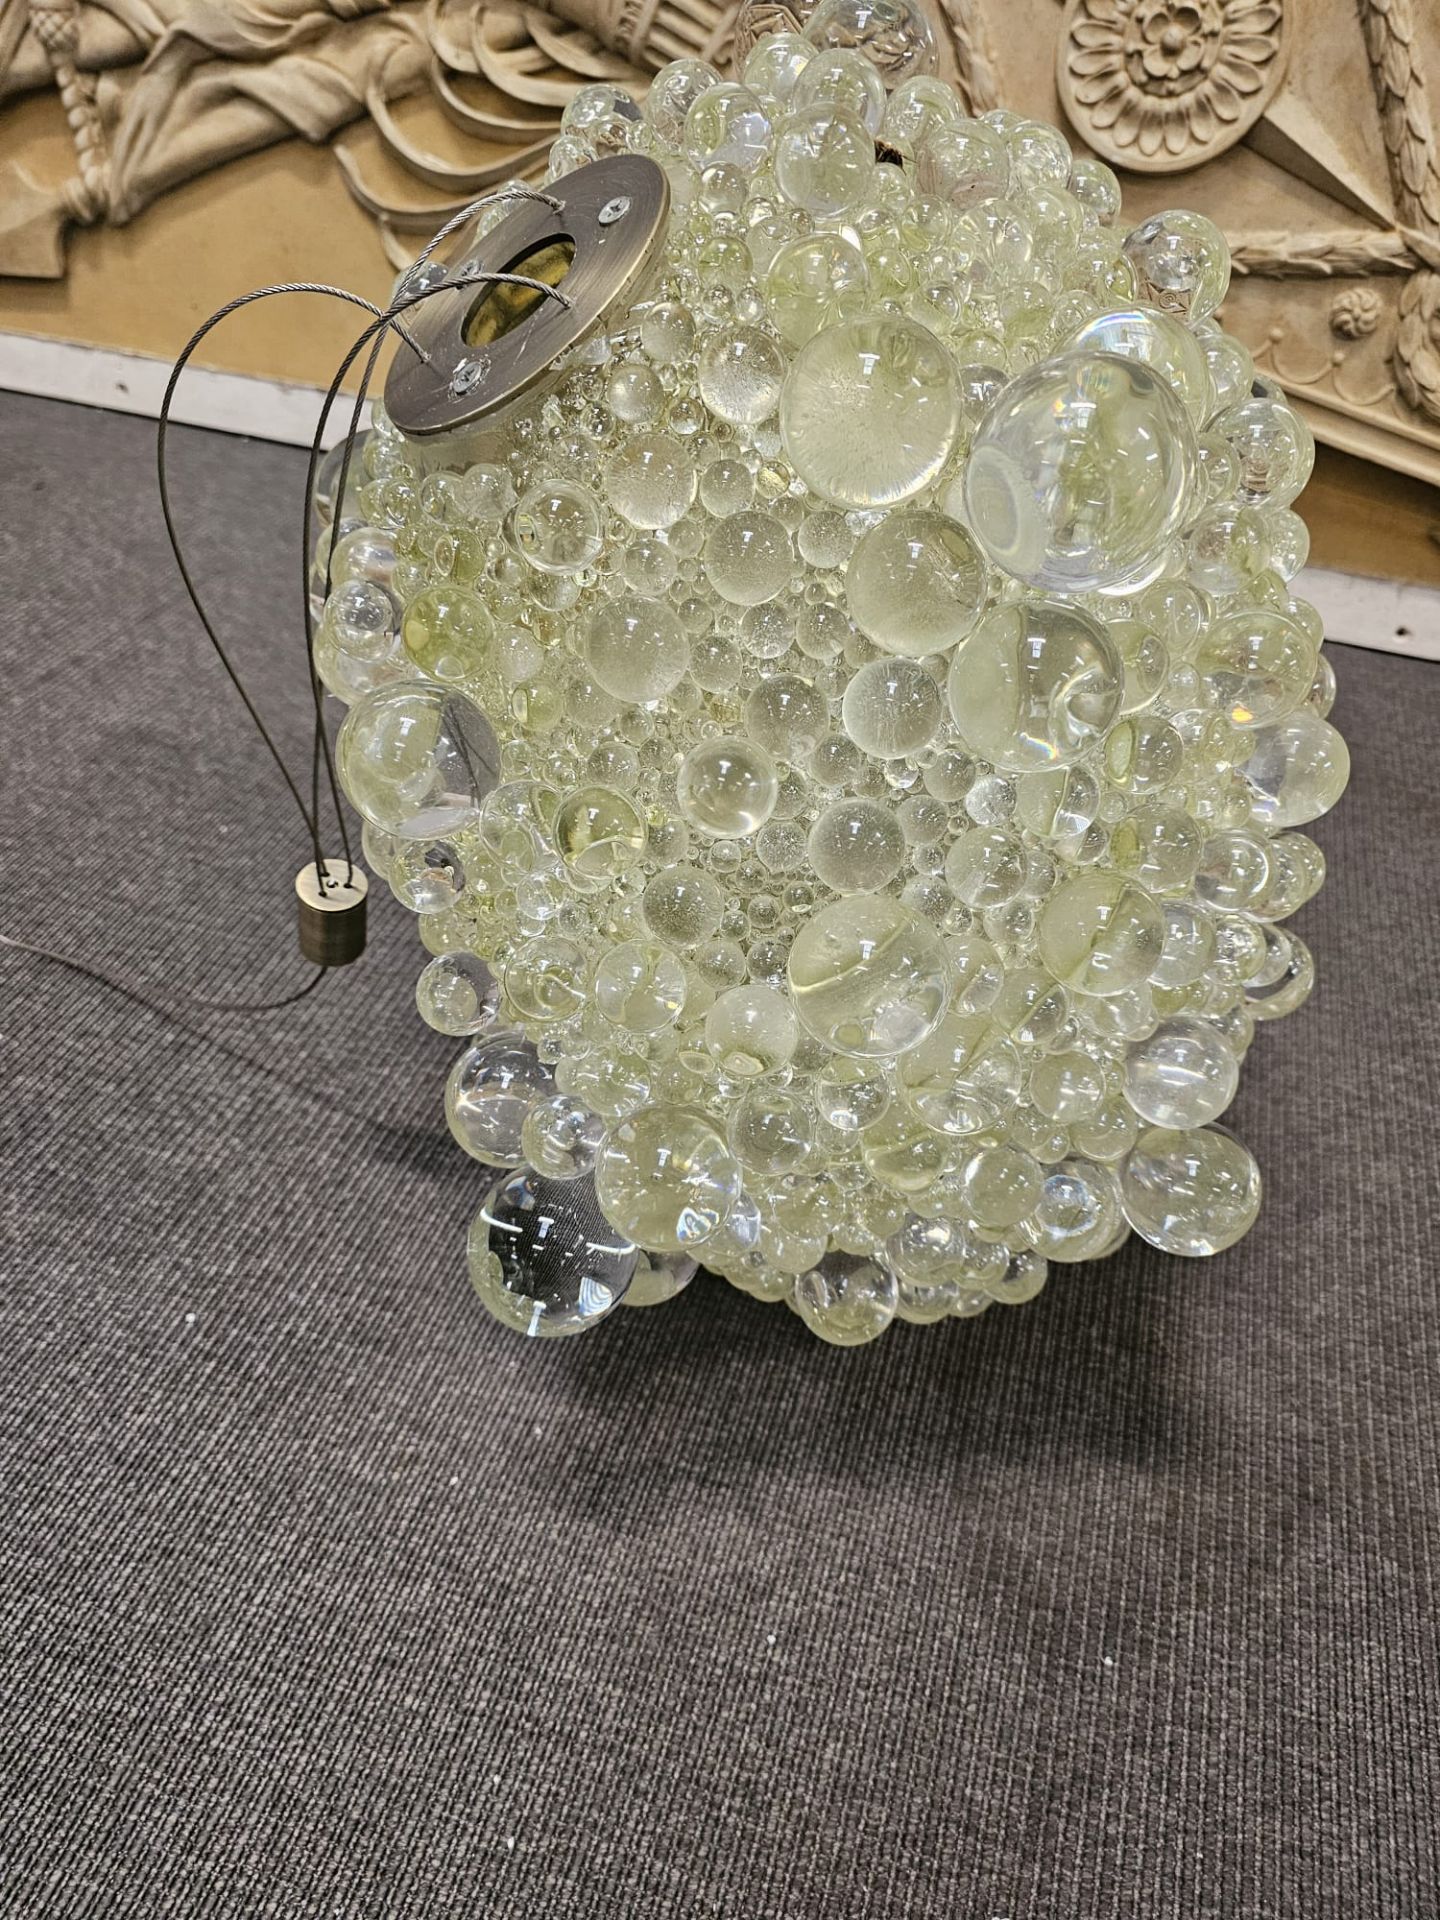 Timothy Oulton Bubble Pendant A Unique Fantastical Piece Depicting The Most Delicate And Fleeting Of - Image 4 of 6